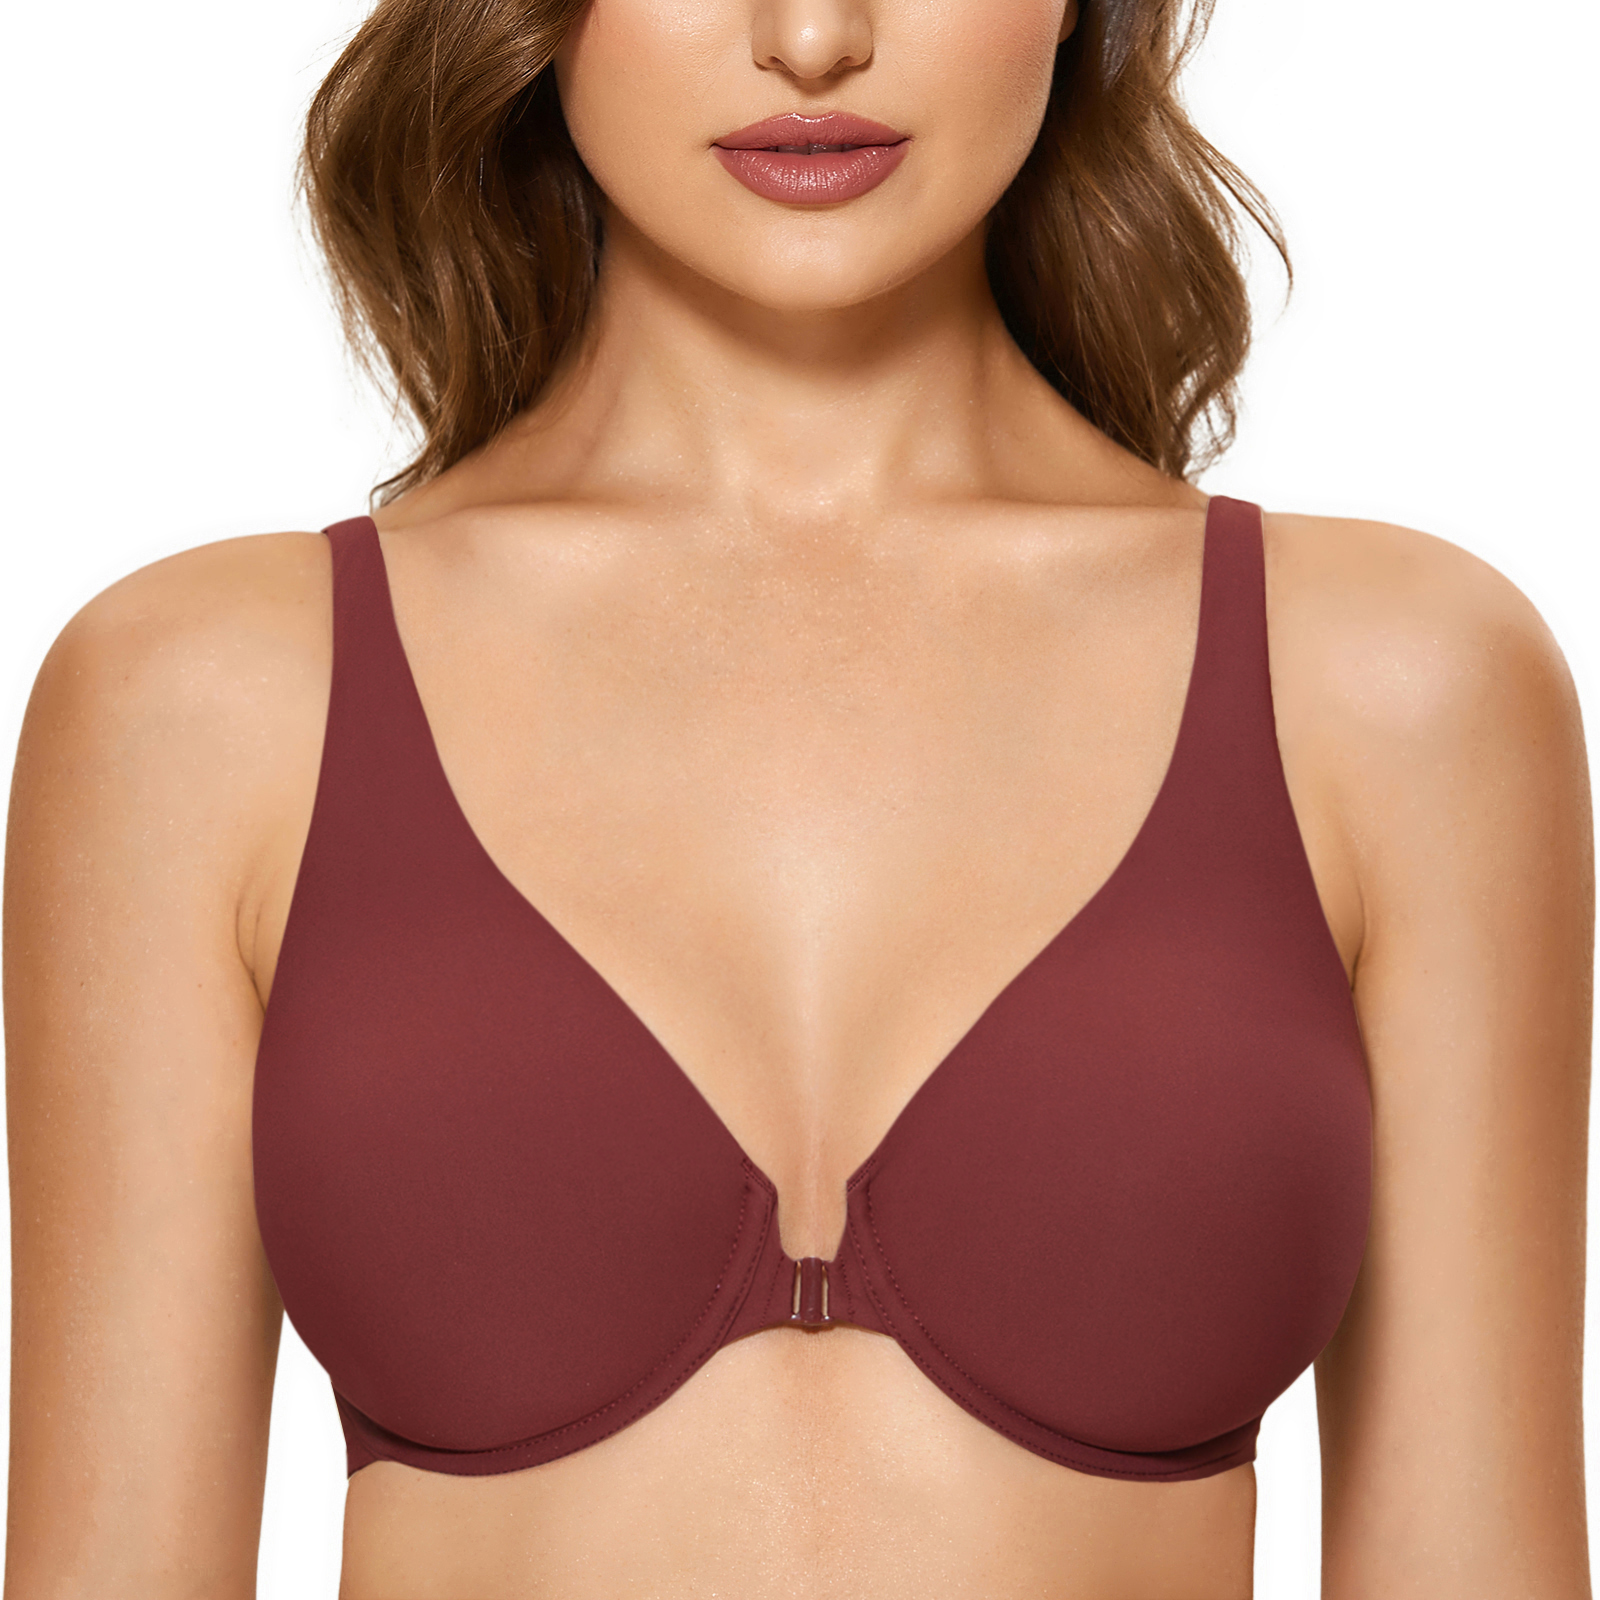 EIMELI Clearance Sale Spring & Summer Seamless Front Closure Bra